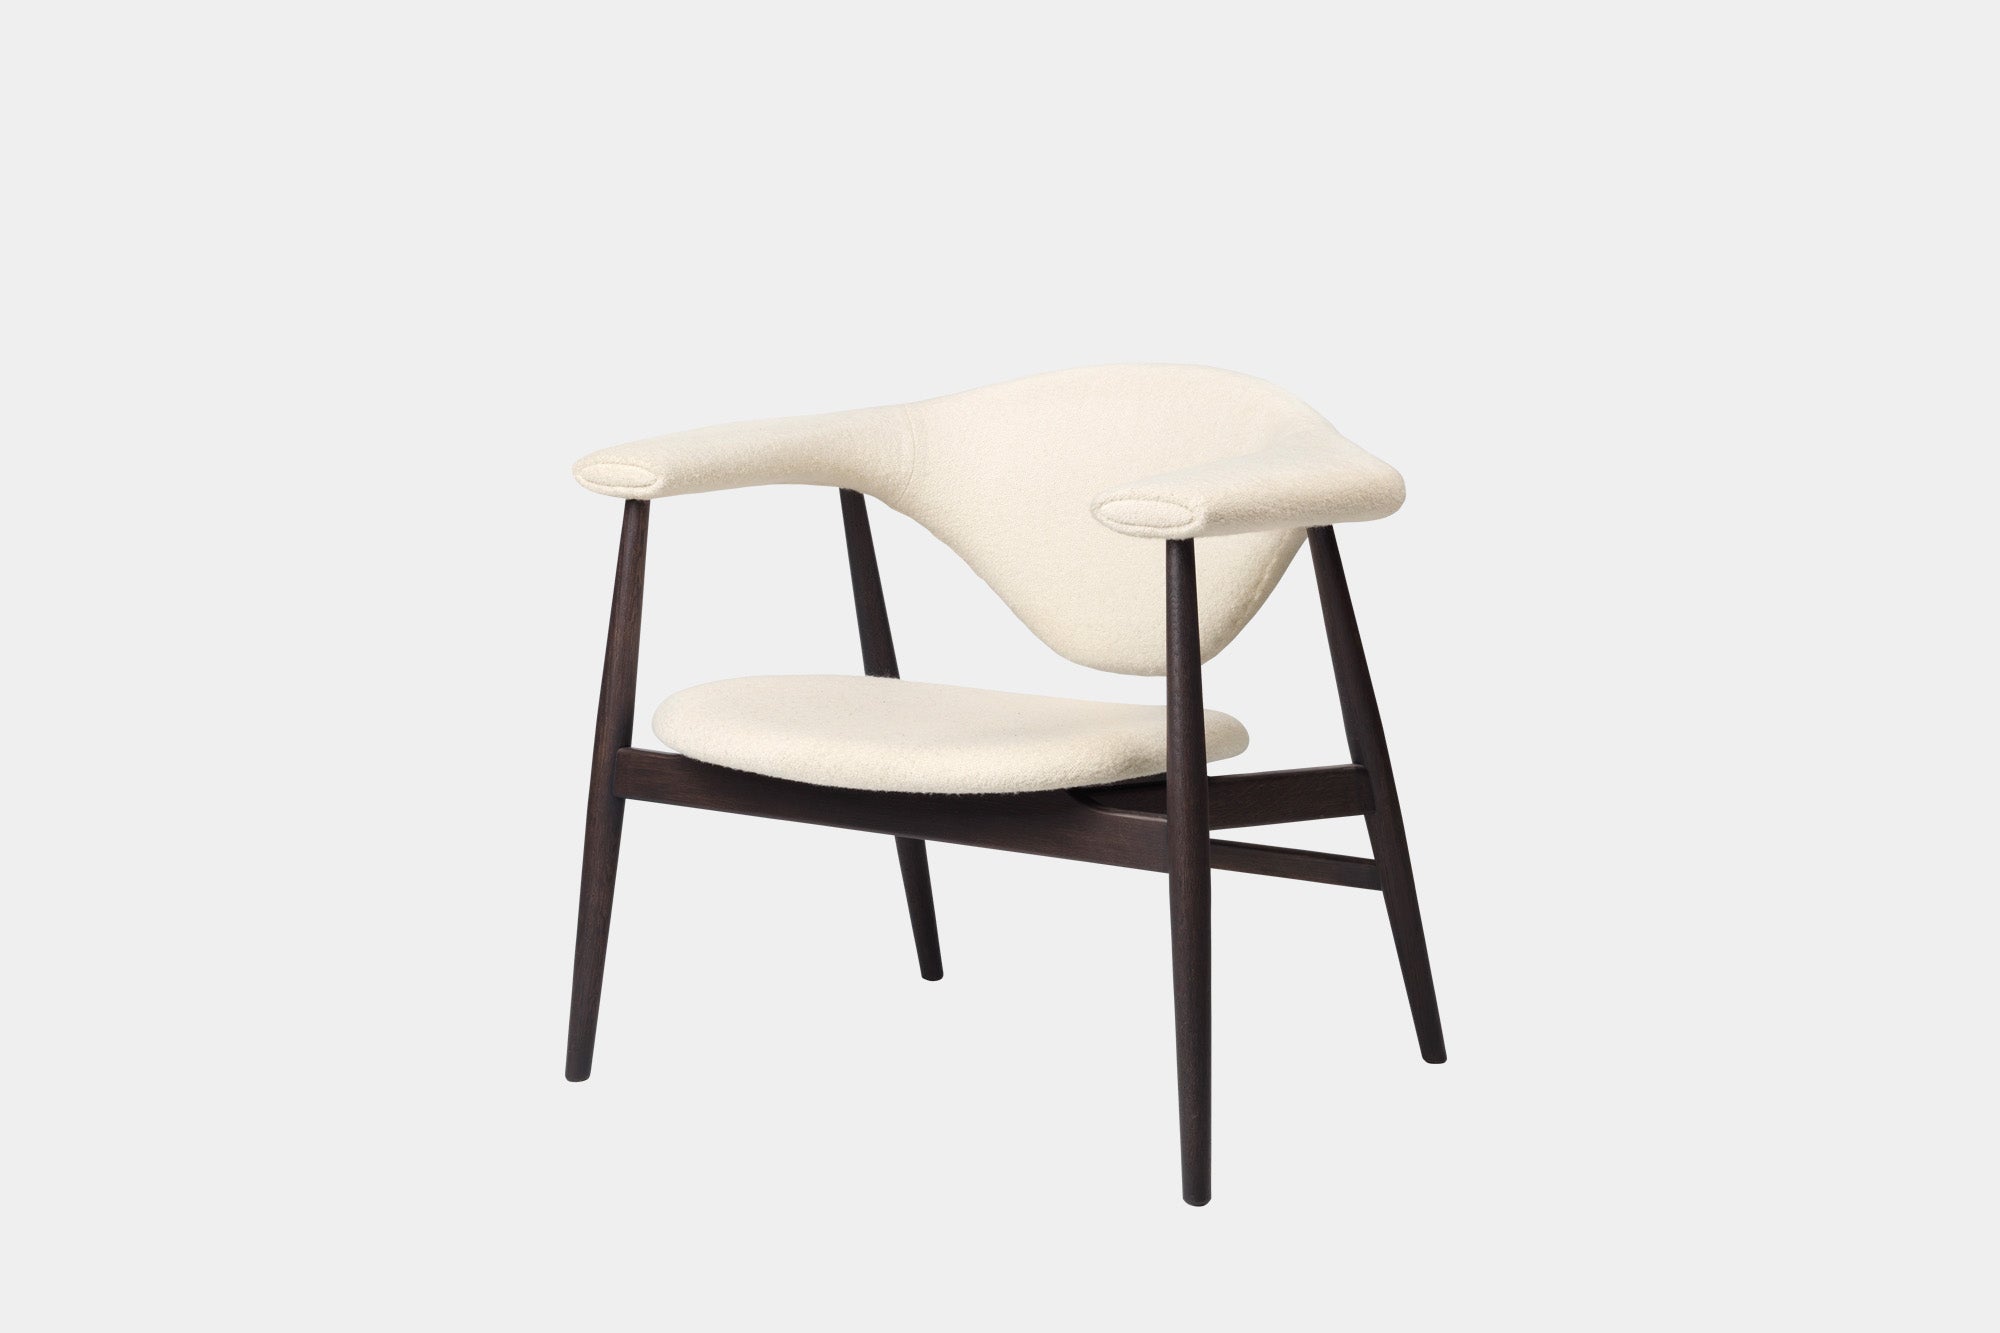 GUBI - Masculo Lounge Chair - Wood Base, Fully Upholstered